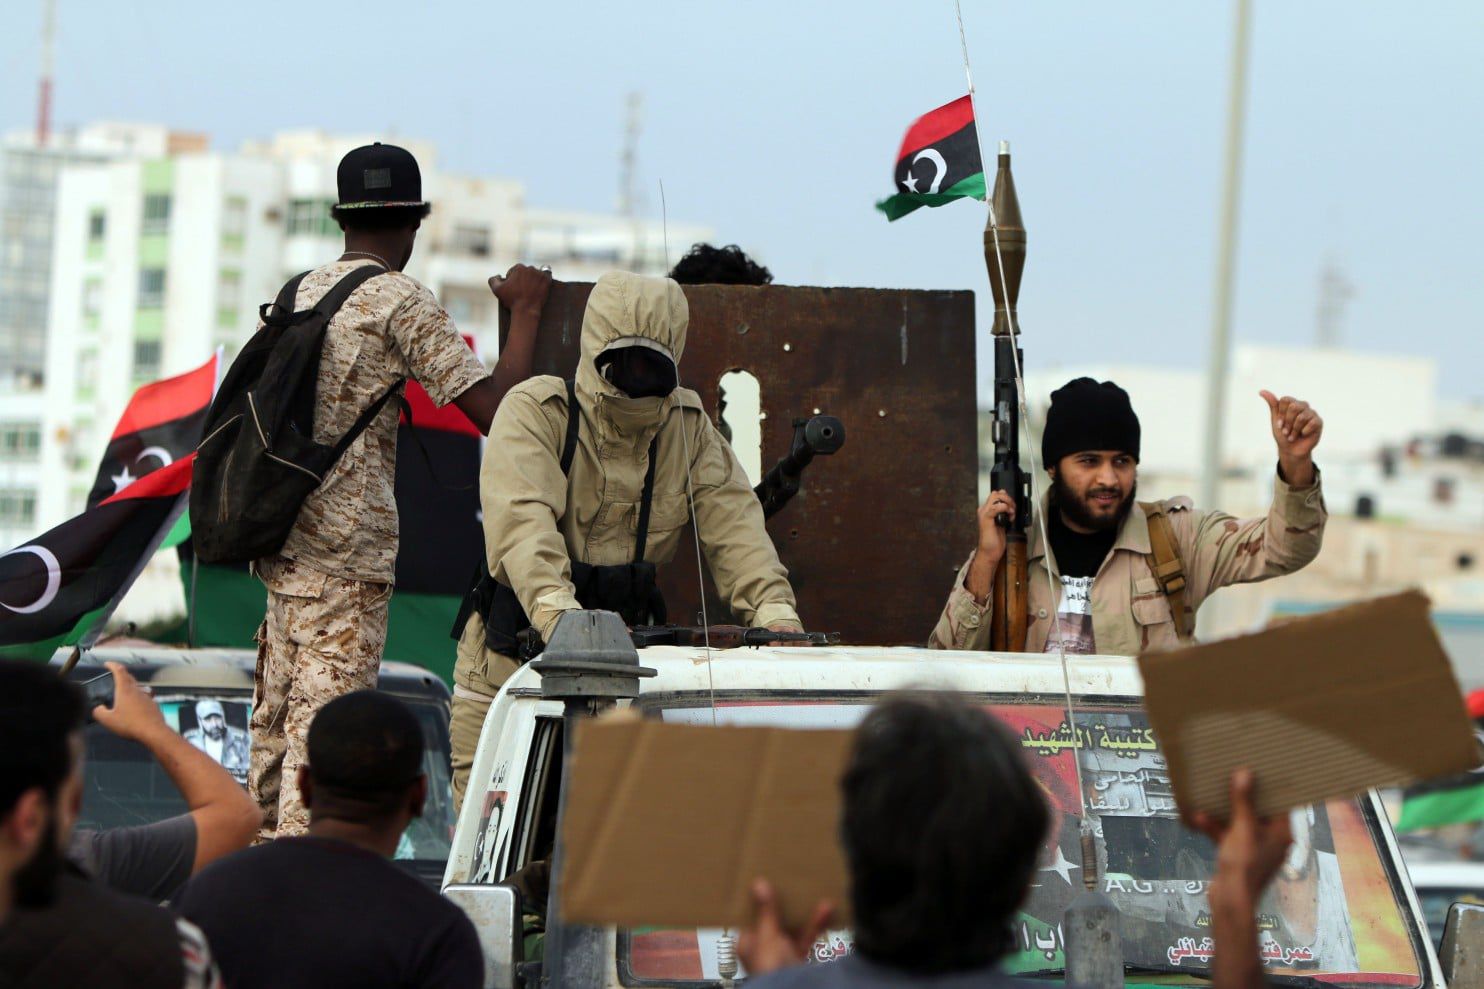 LLL - GFATF - Libyan National Army hands over top wanted terrorist to Egypt